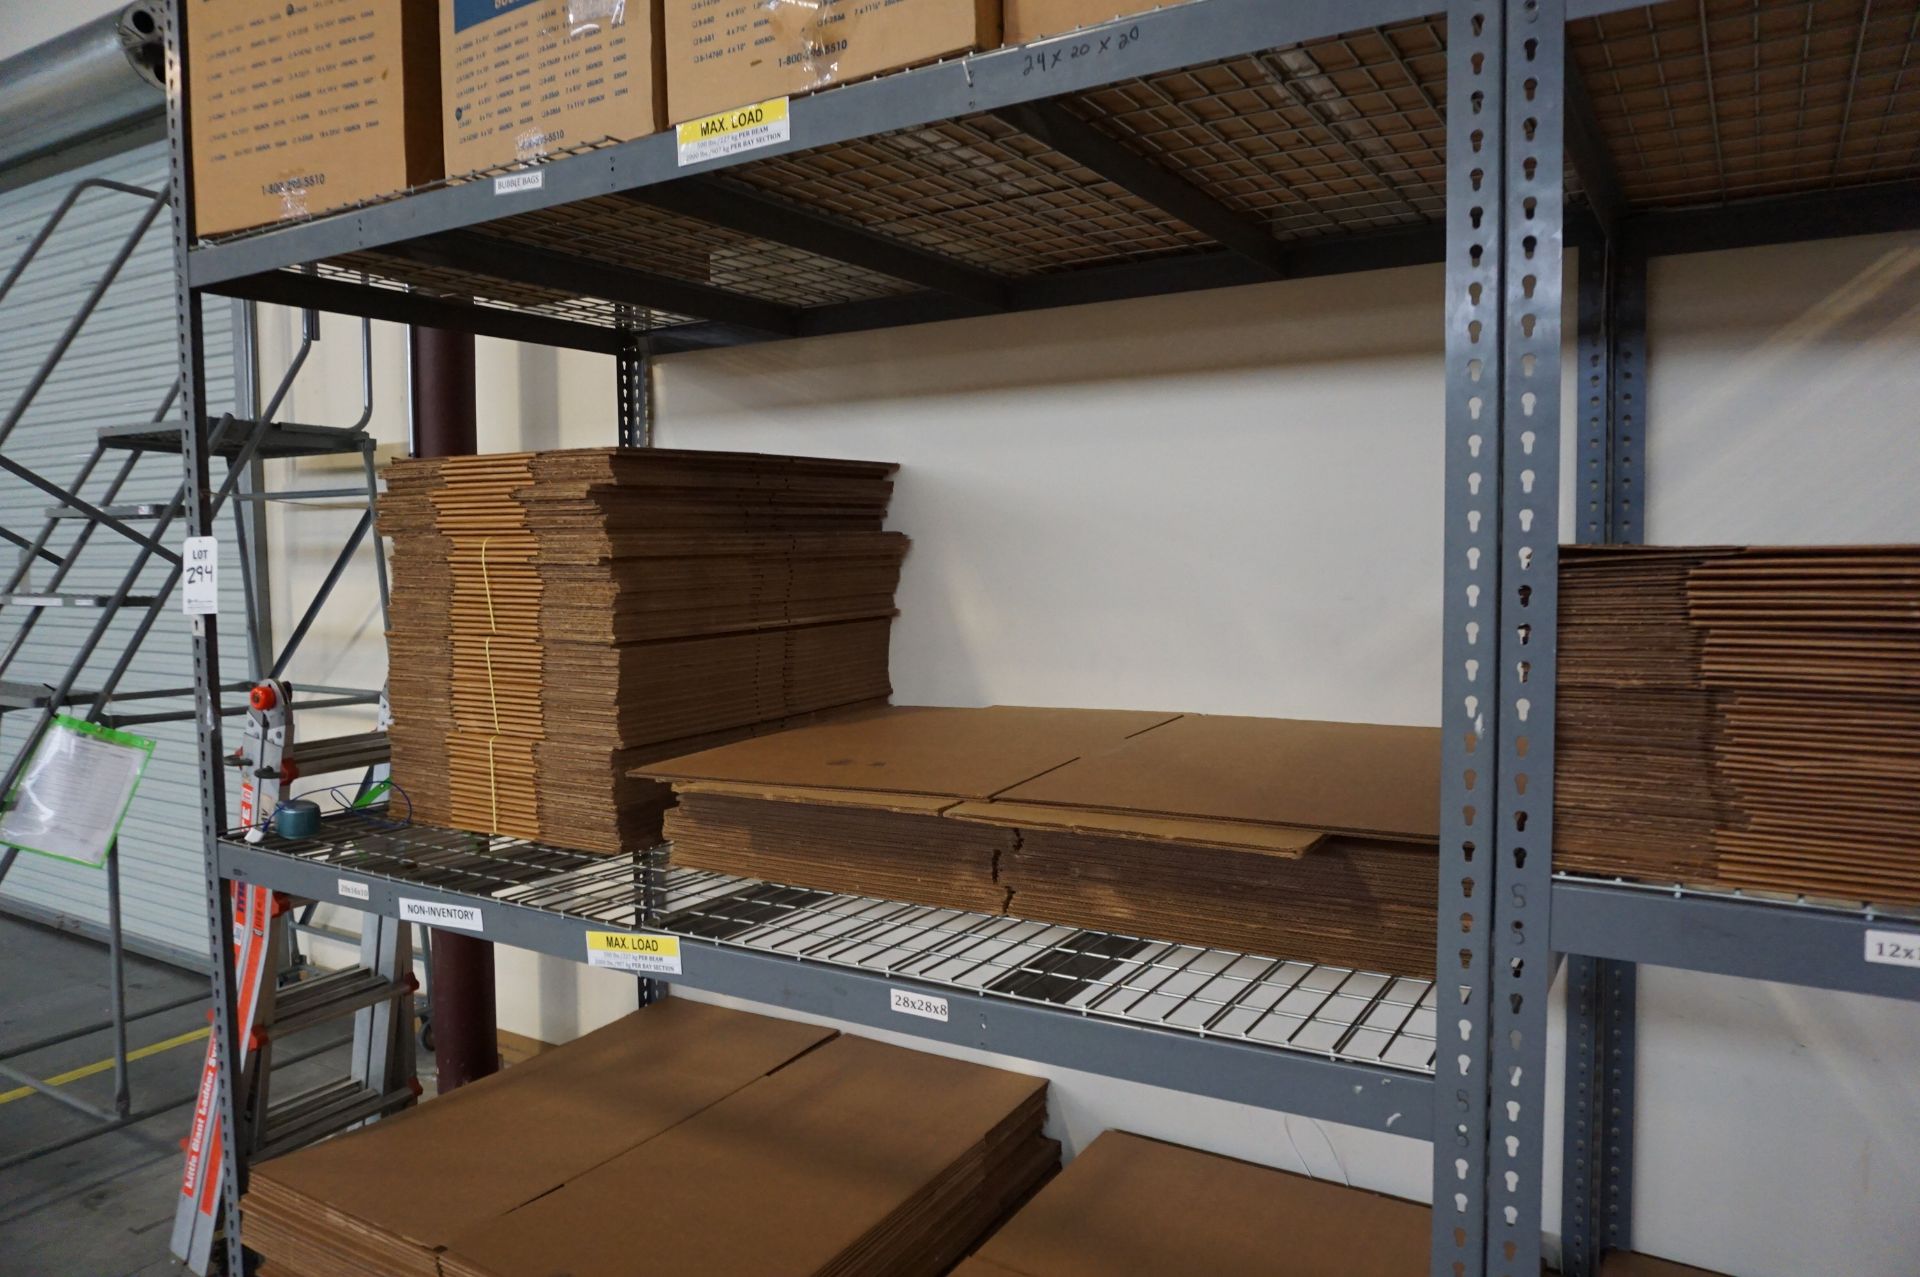 (2 SECTIONS) STEEL SHOP RACKS WITH MISC. SHIPPING SUPPLIES - Image 3 of 4